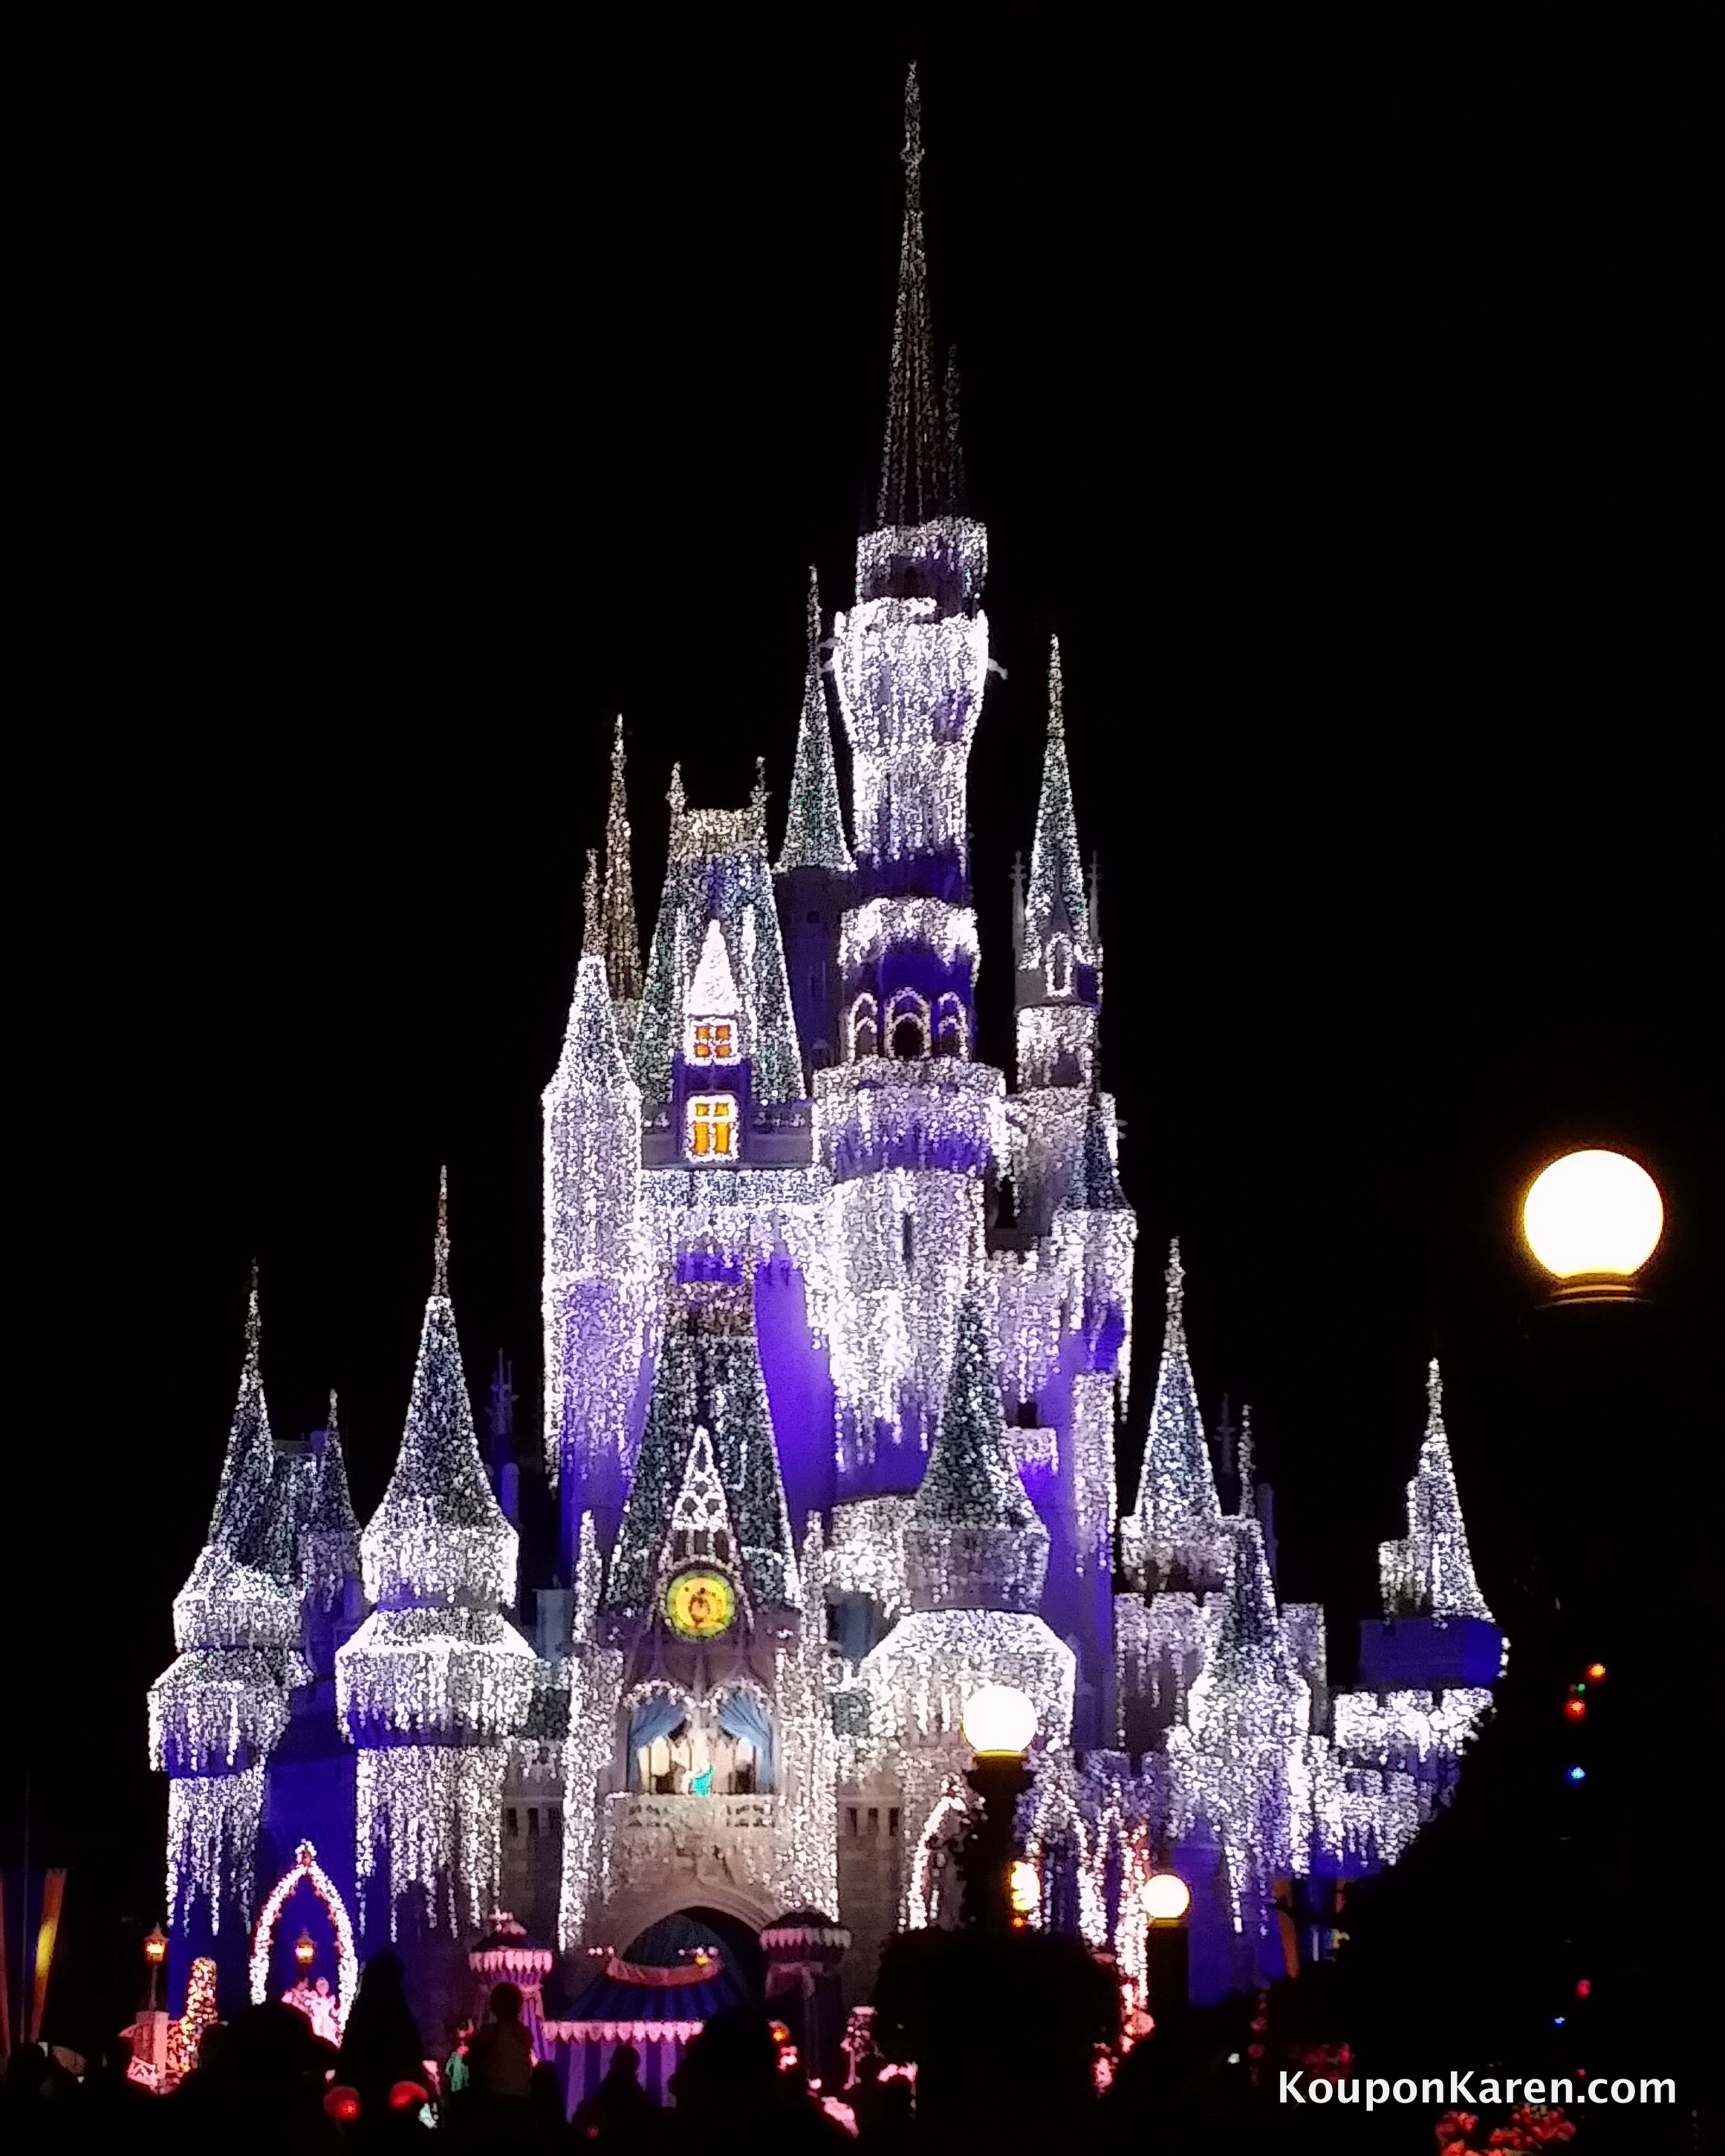 Awesome Pictures with the Samsung Galaxy Note 3 {and pictures from our Disney World vacation}